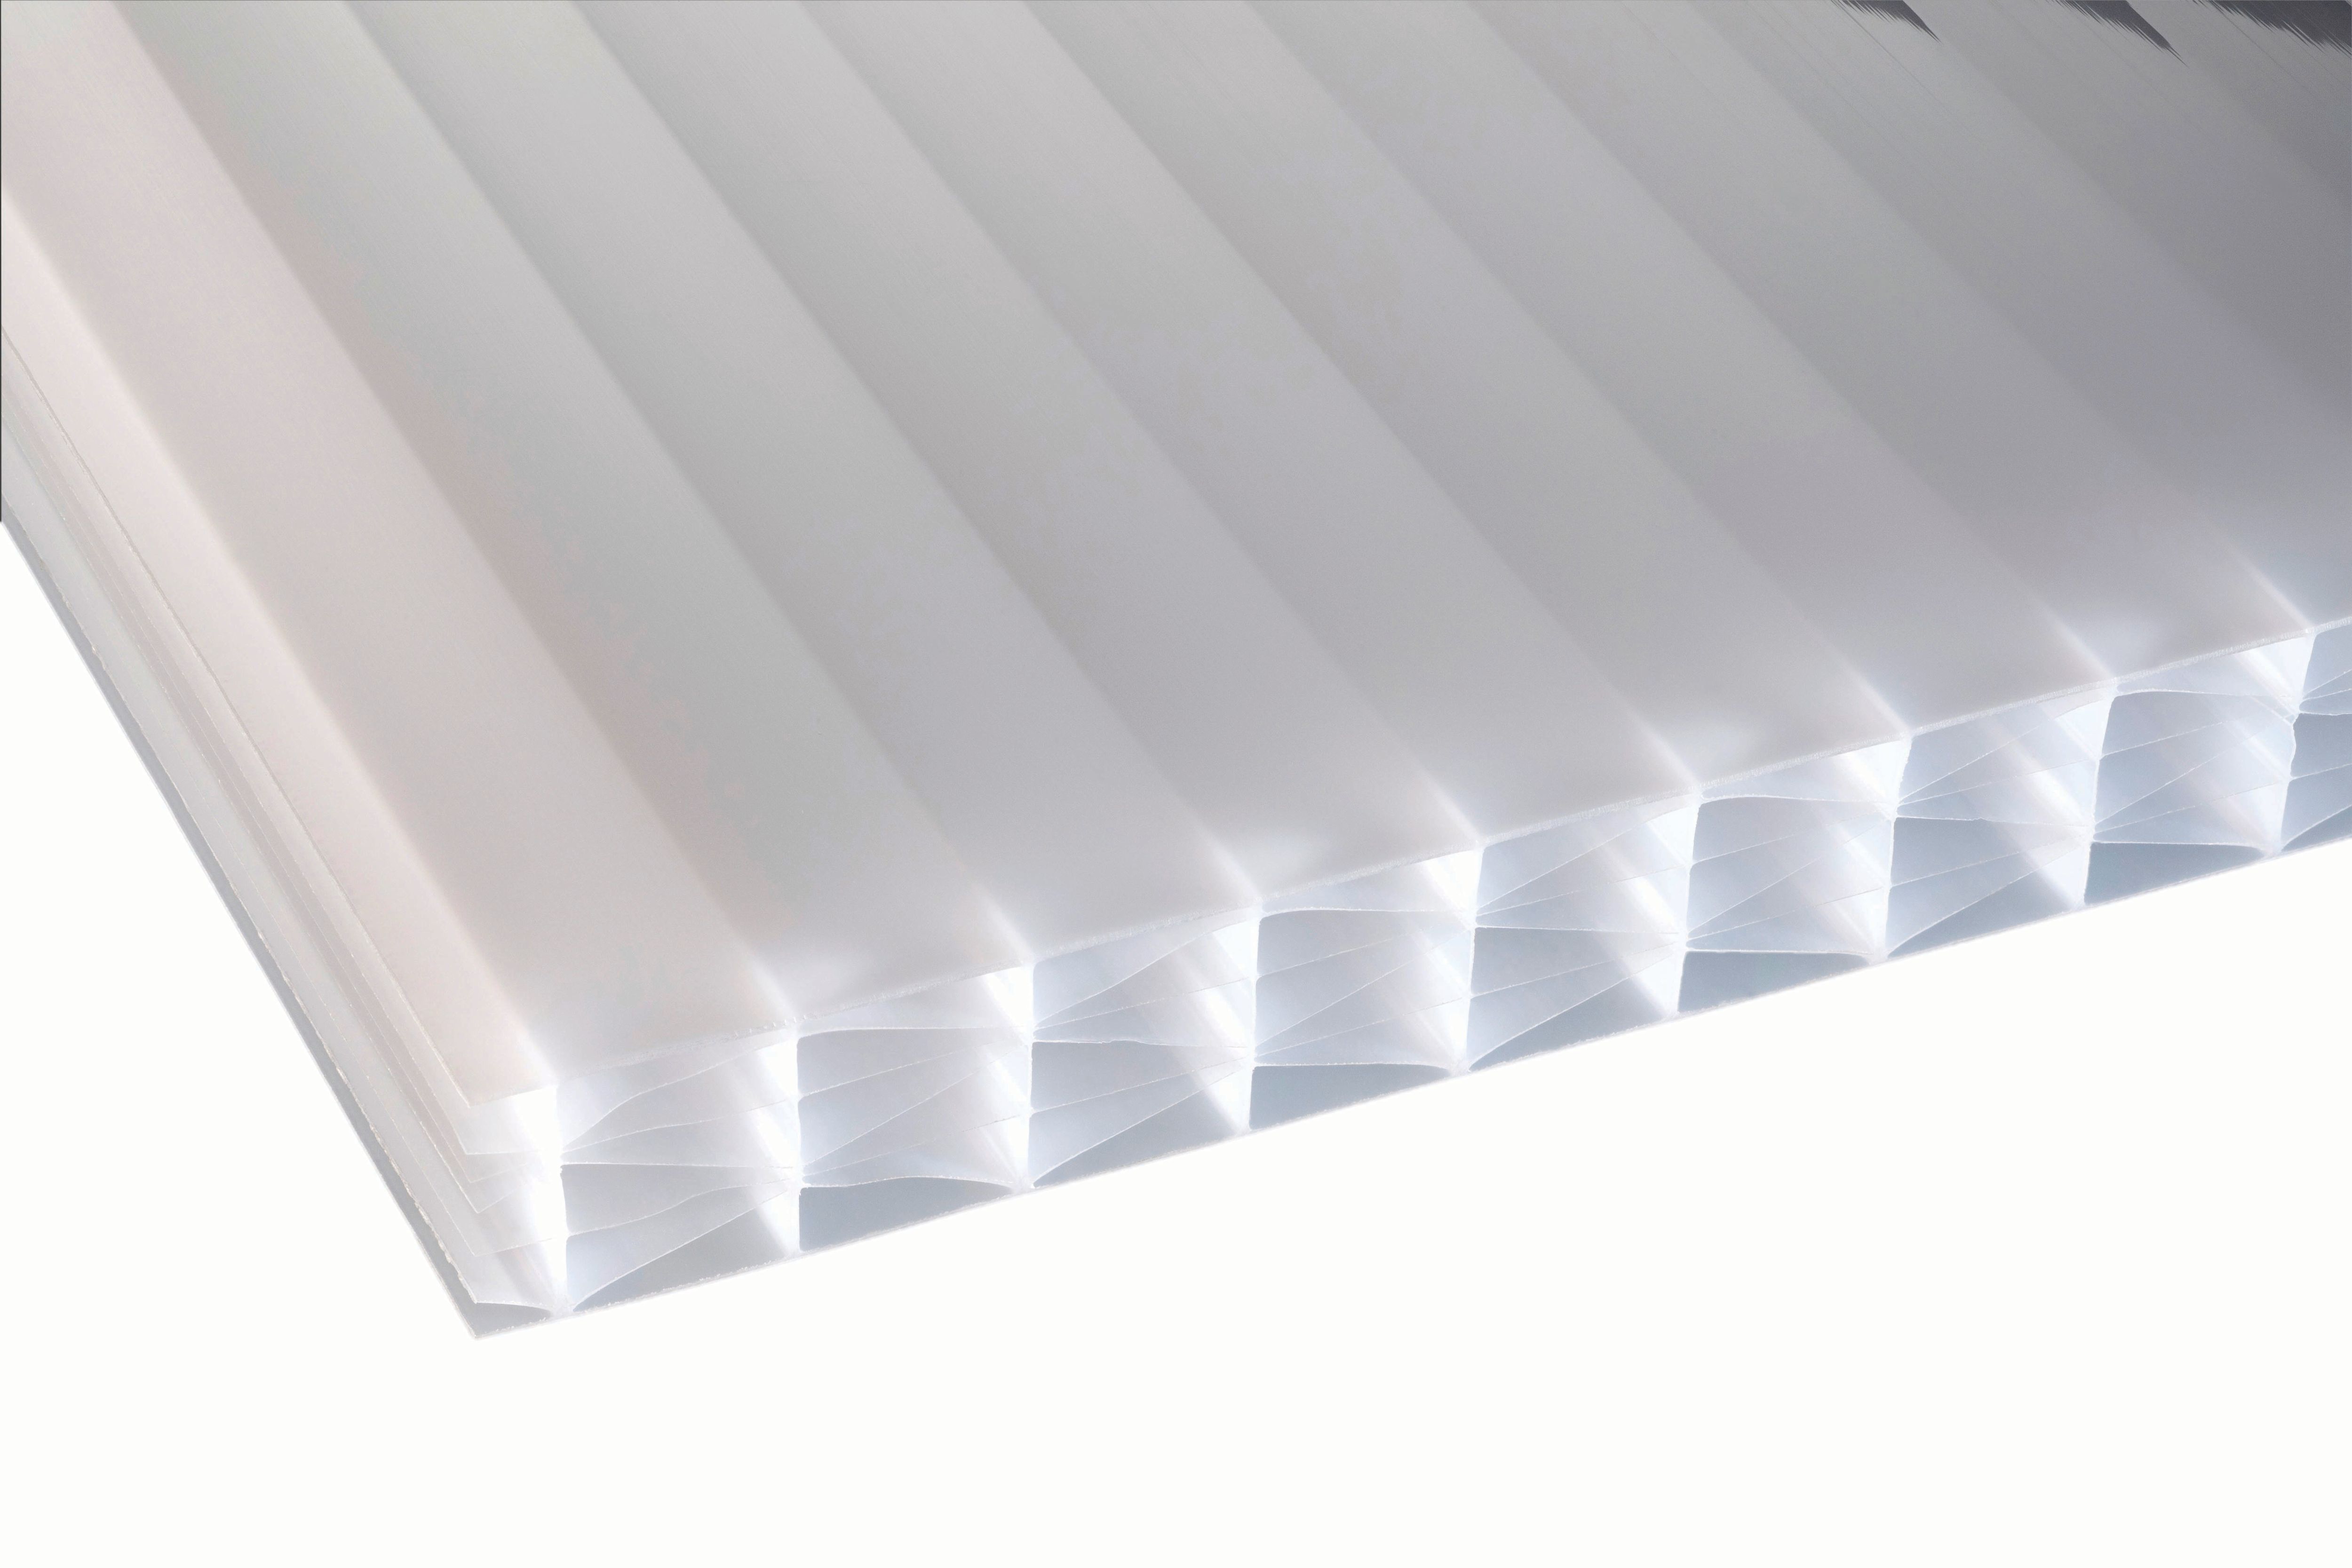 Image of 25mm Opal Multiwall Polycarbonate Sheet - 2000 x 700mm